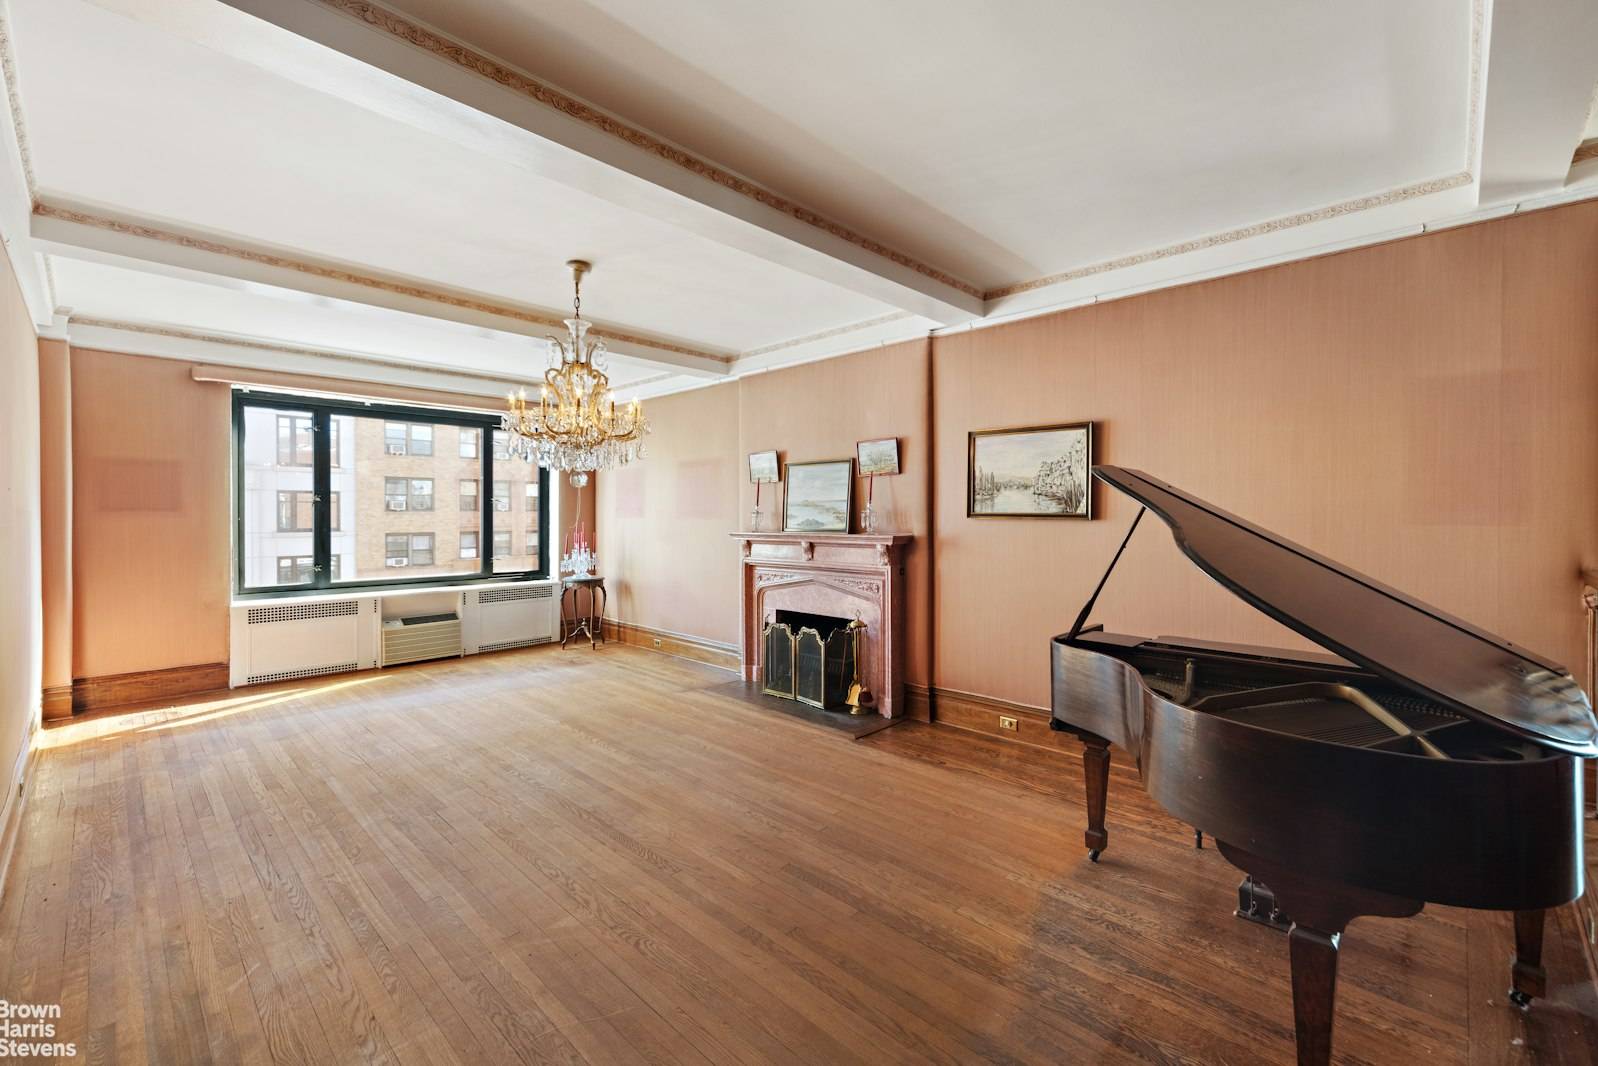 This spacious residence has the charm of the prewar building with all the preserved details, beamed high ceilings, beautiful hardwood floors, steel door frames.